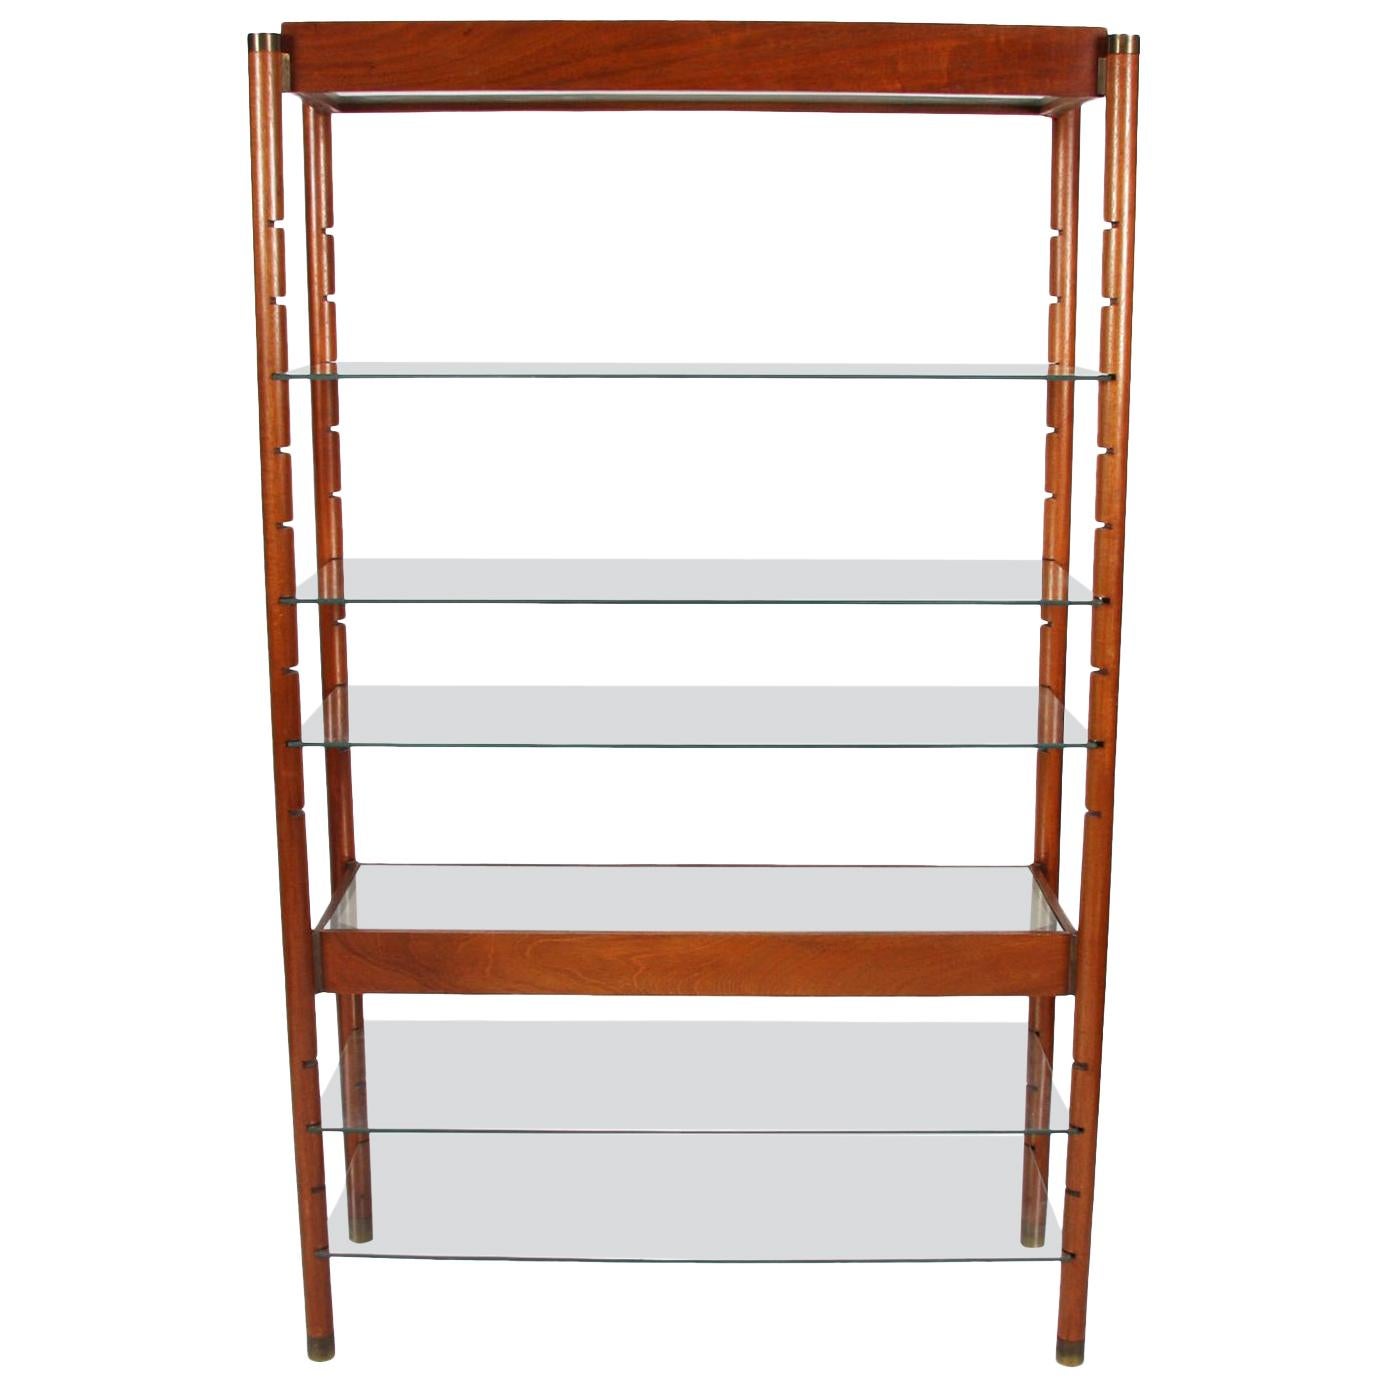 Midcentury English Wooden and Glass Bookshelf with Light Up Shelves For Sale